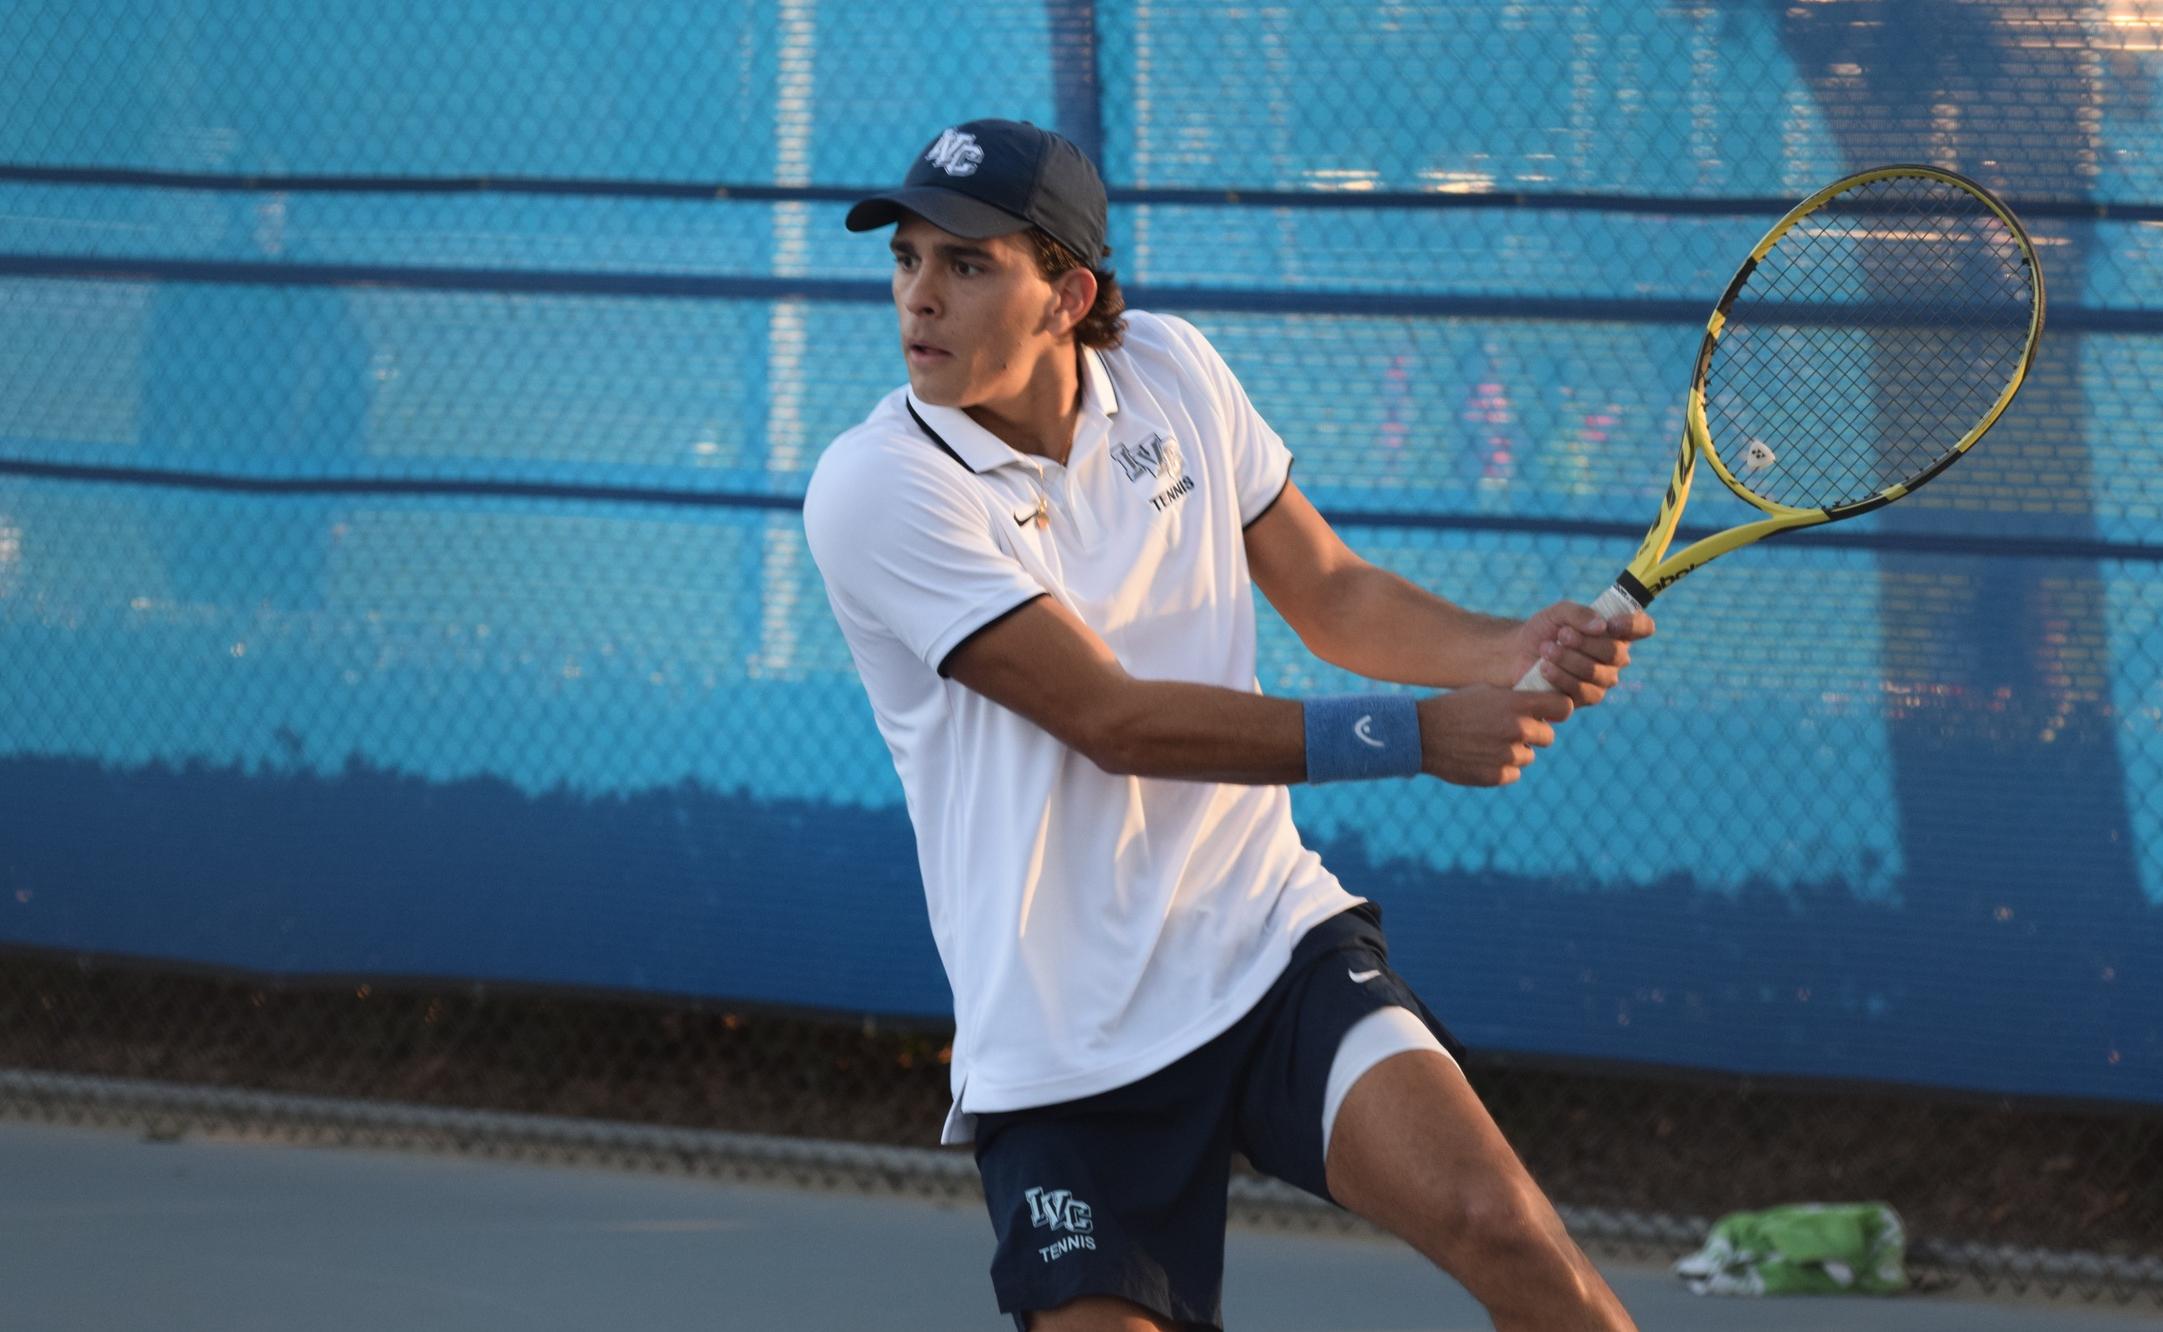 Men's tennis team blanks another conference opponent